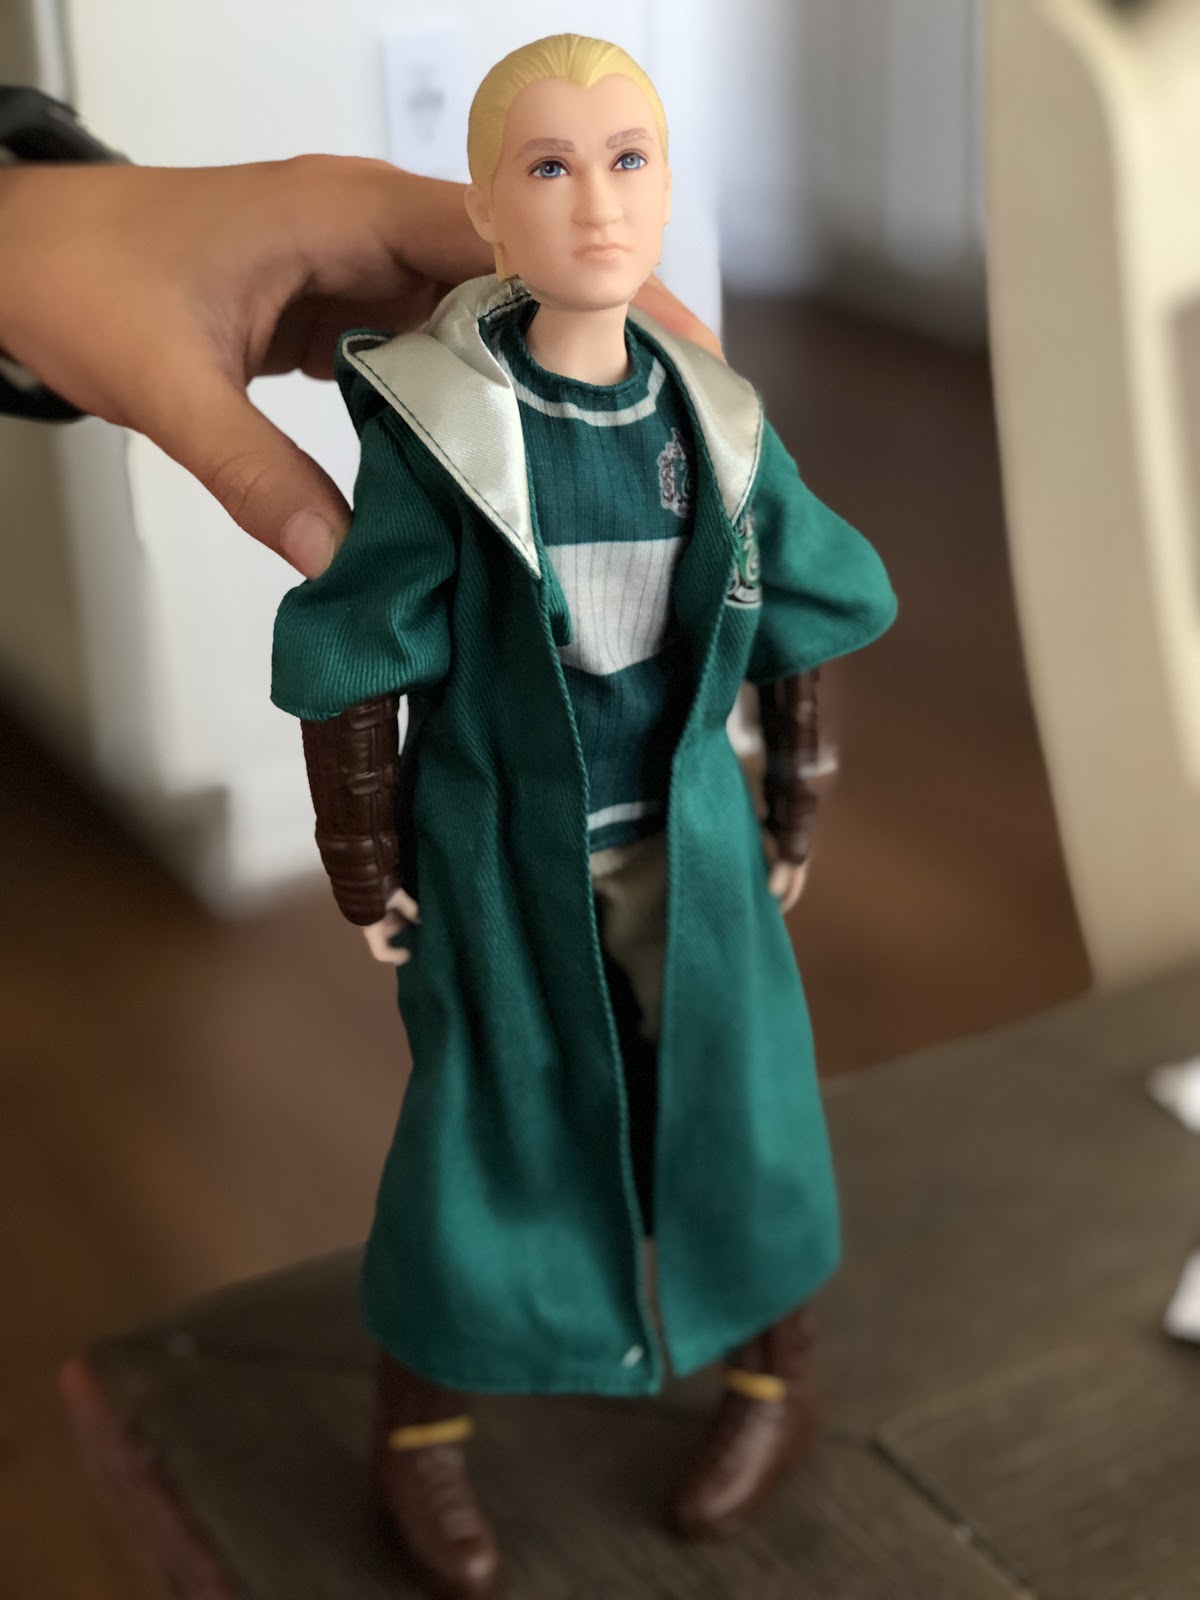 A Harry Potter action figure on a table.